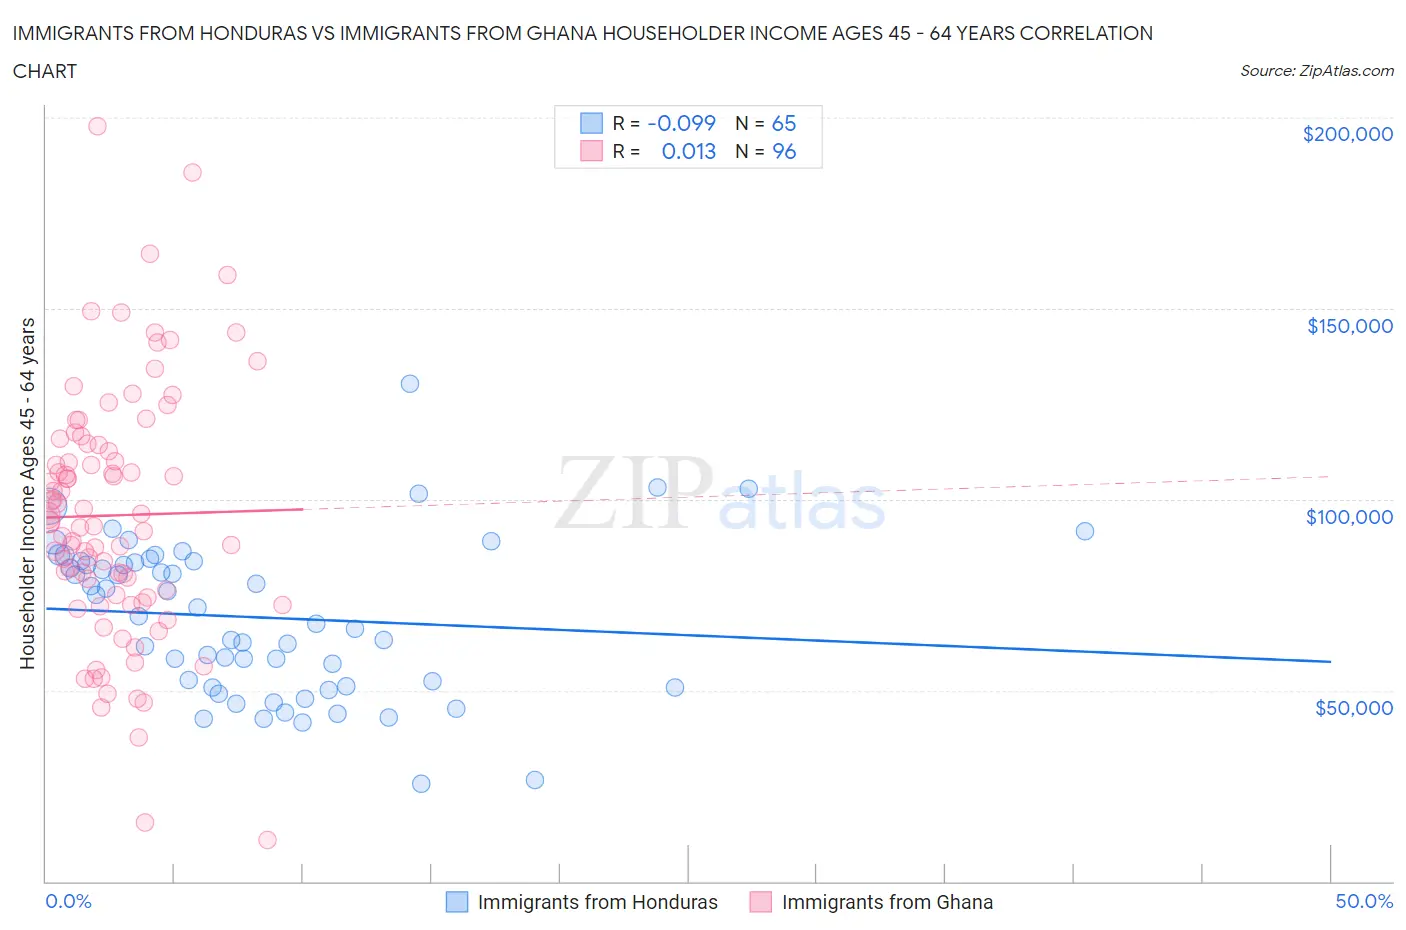 Immigrants from Honduras vs Immigrants from Ghana Householder Income Ages 45 - 64 years